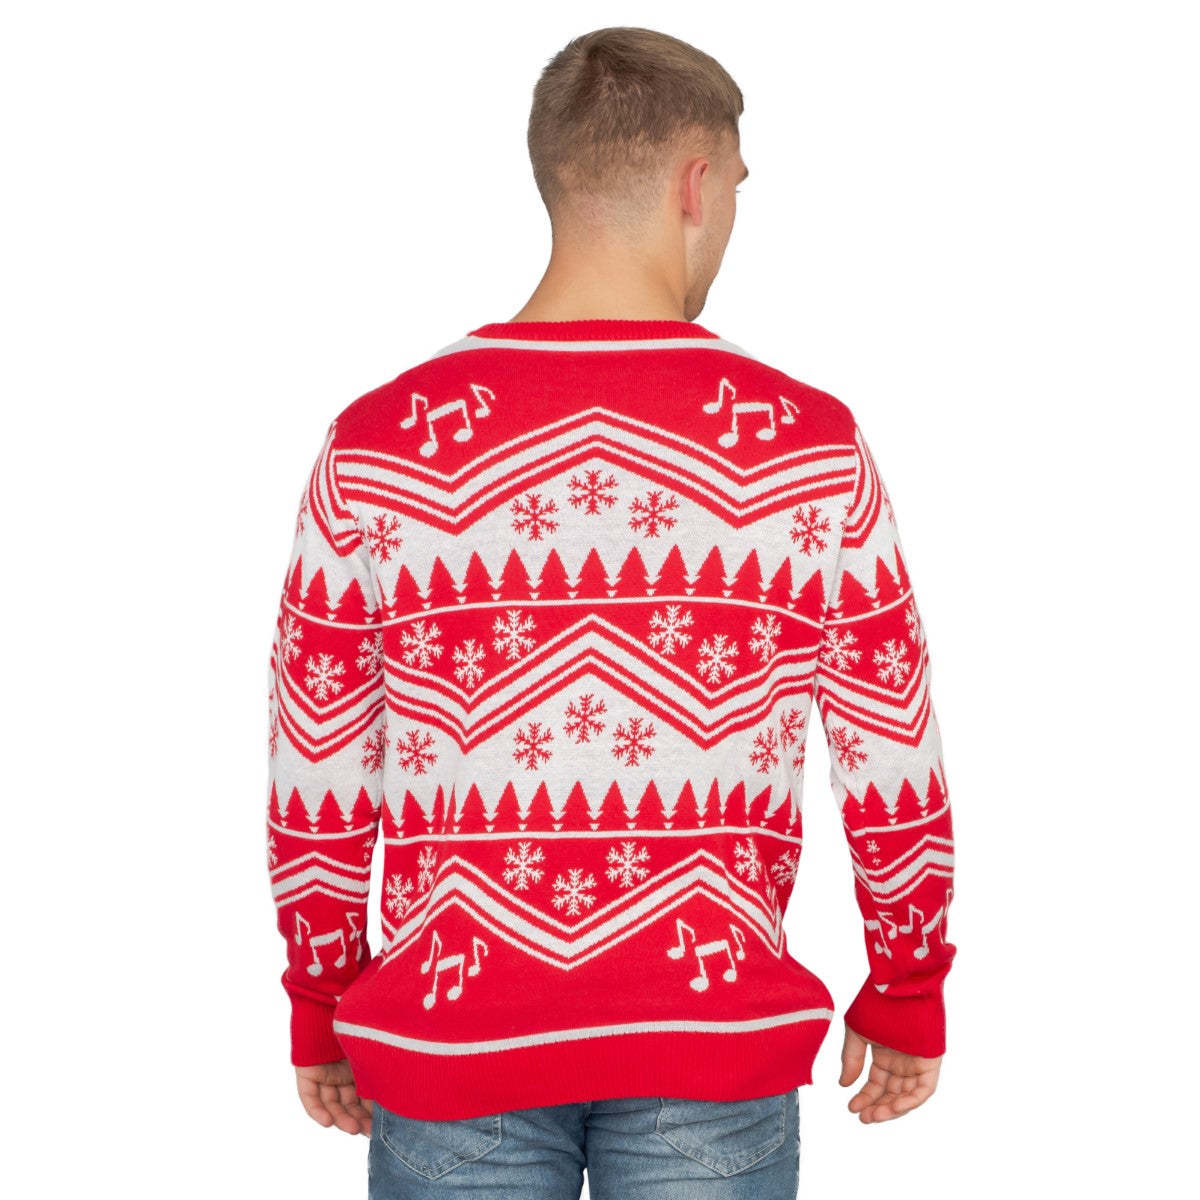 Flappy Drummer Boy Animated Ugly Christmas Sweater 3